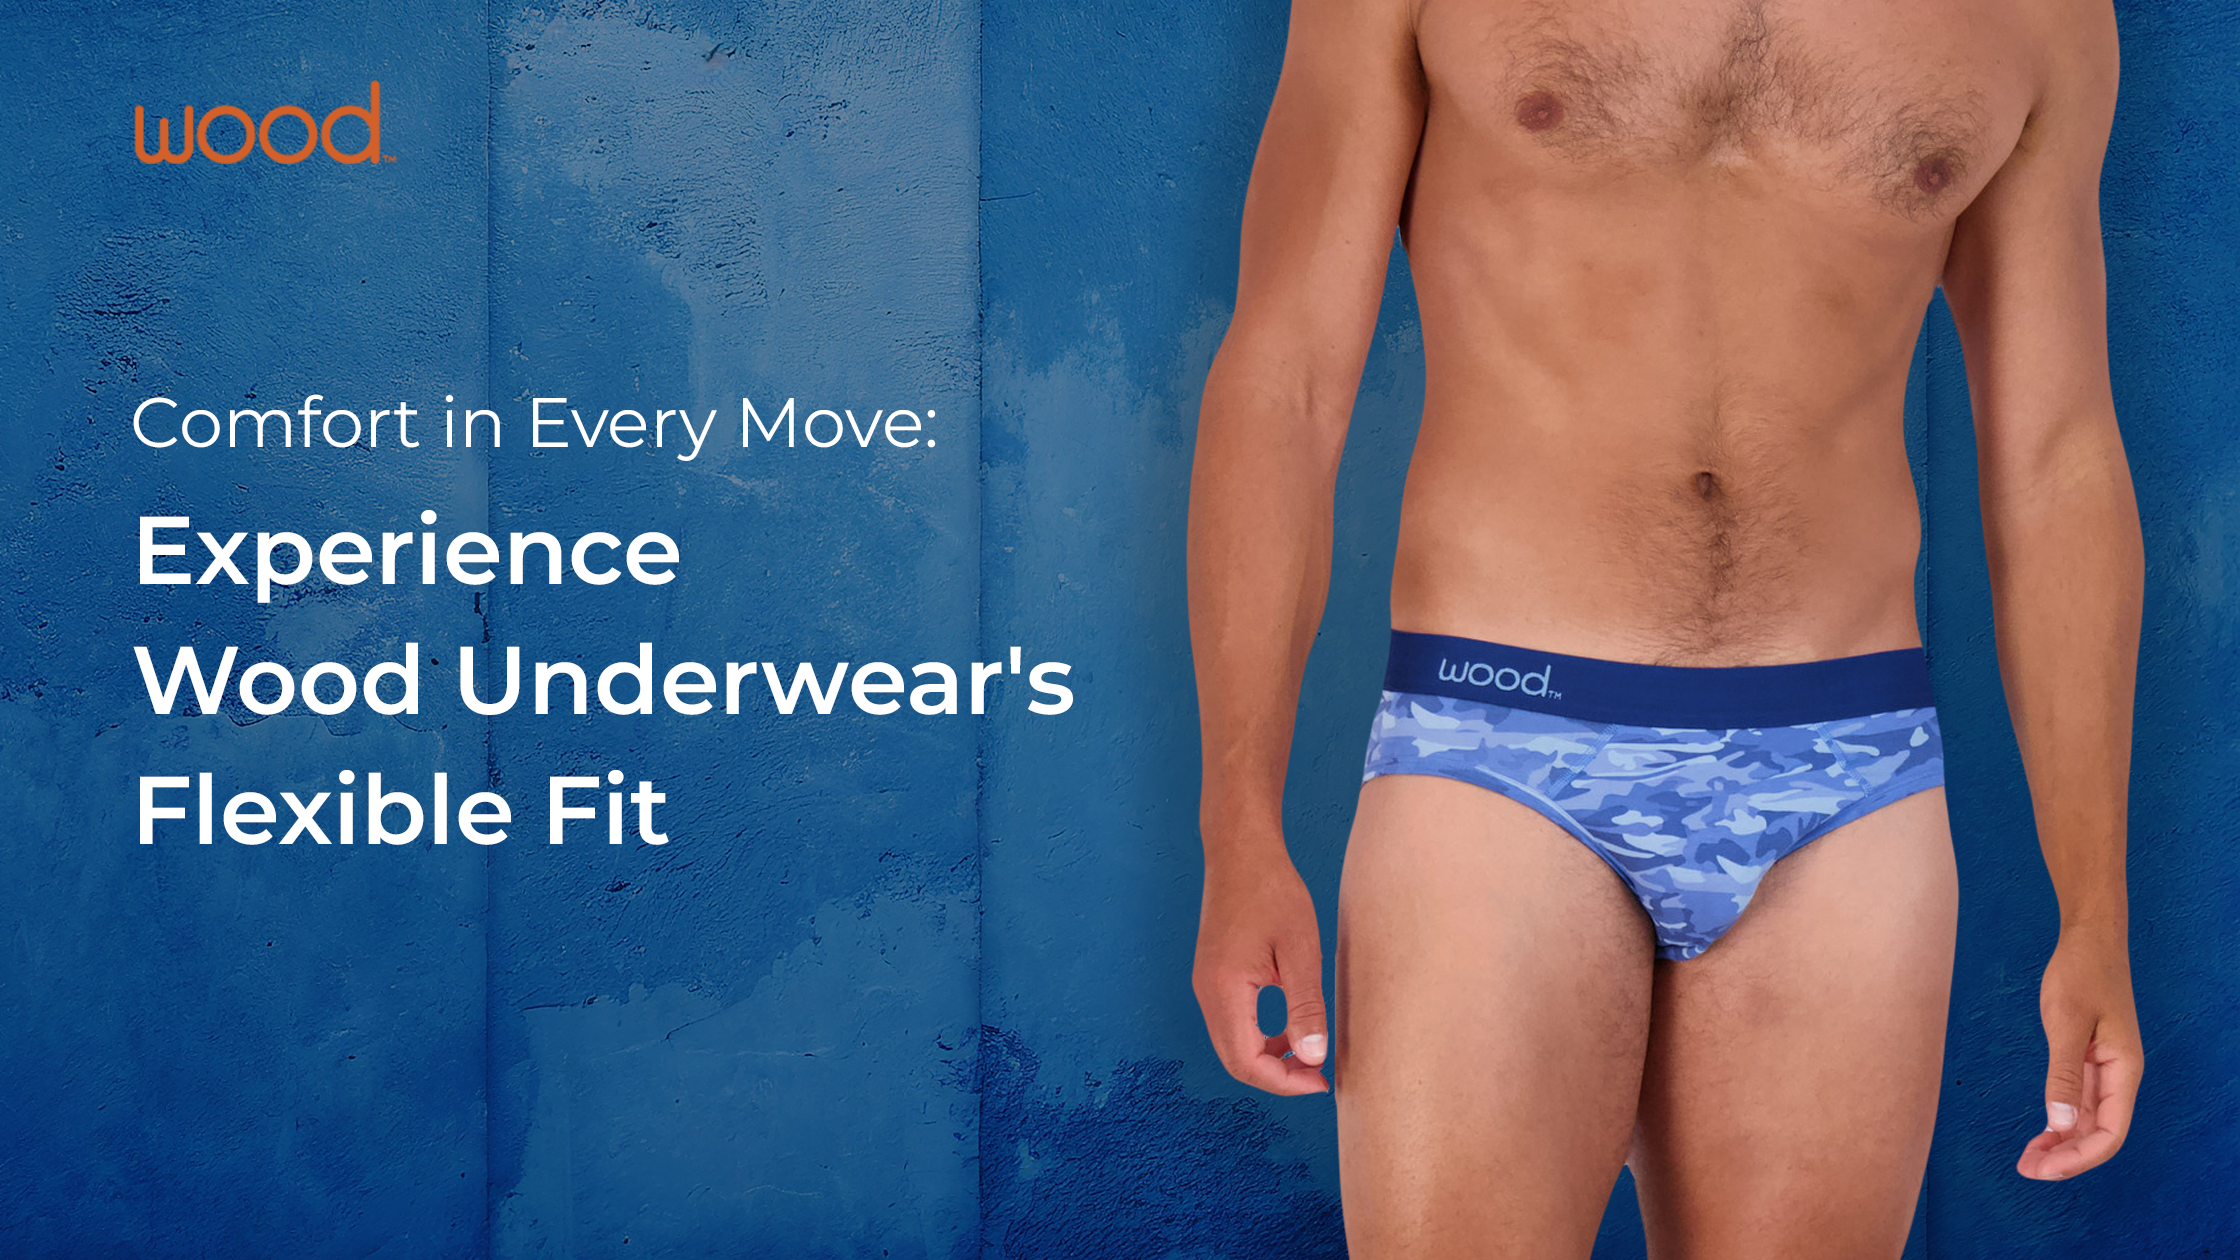 The Science Behind the Comfort of Wood Underwear